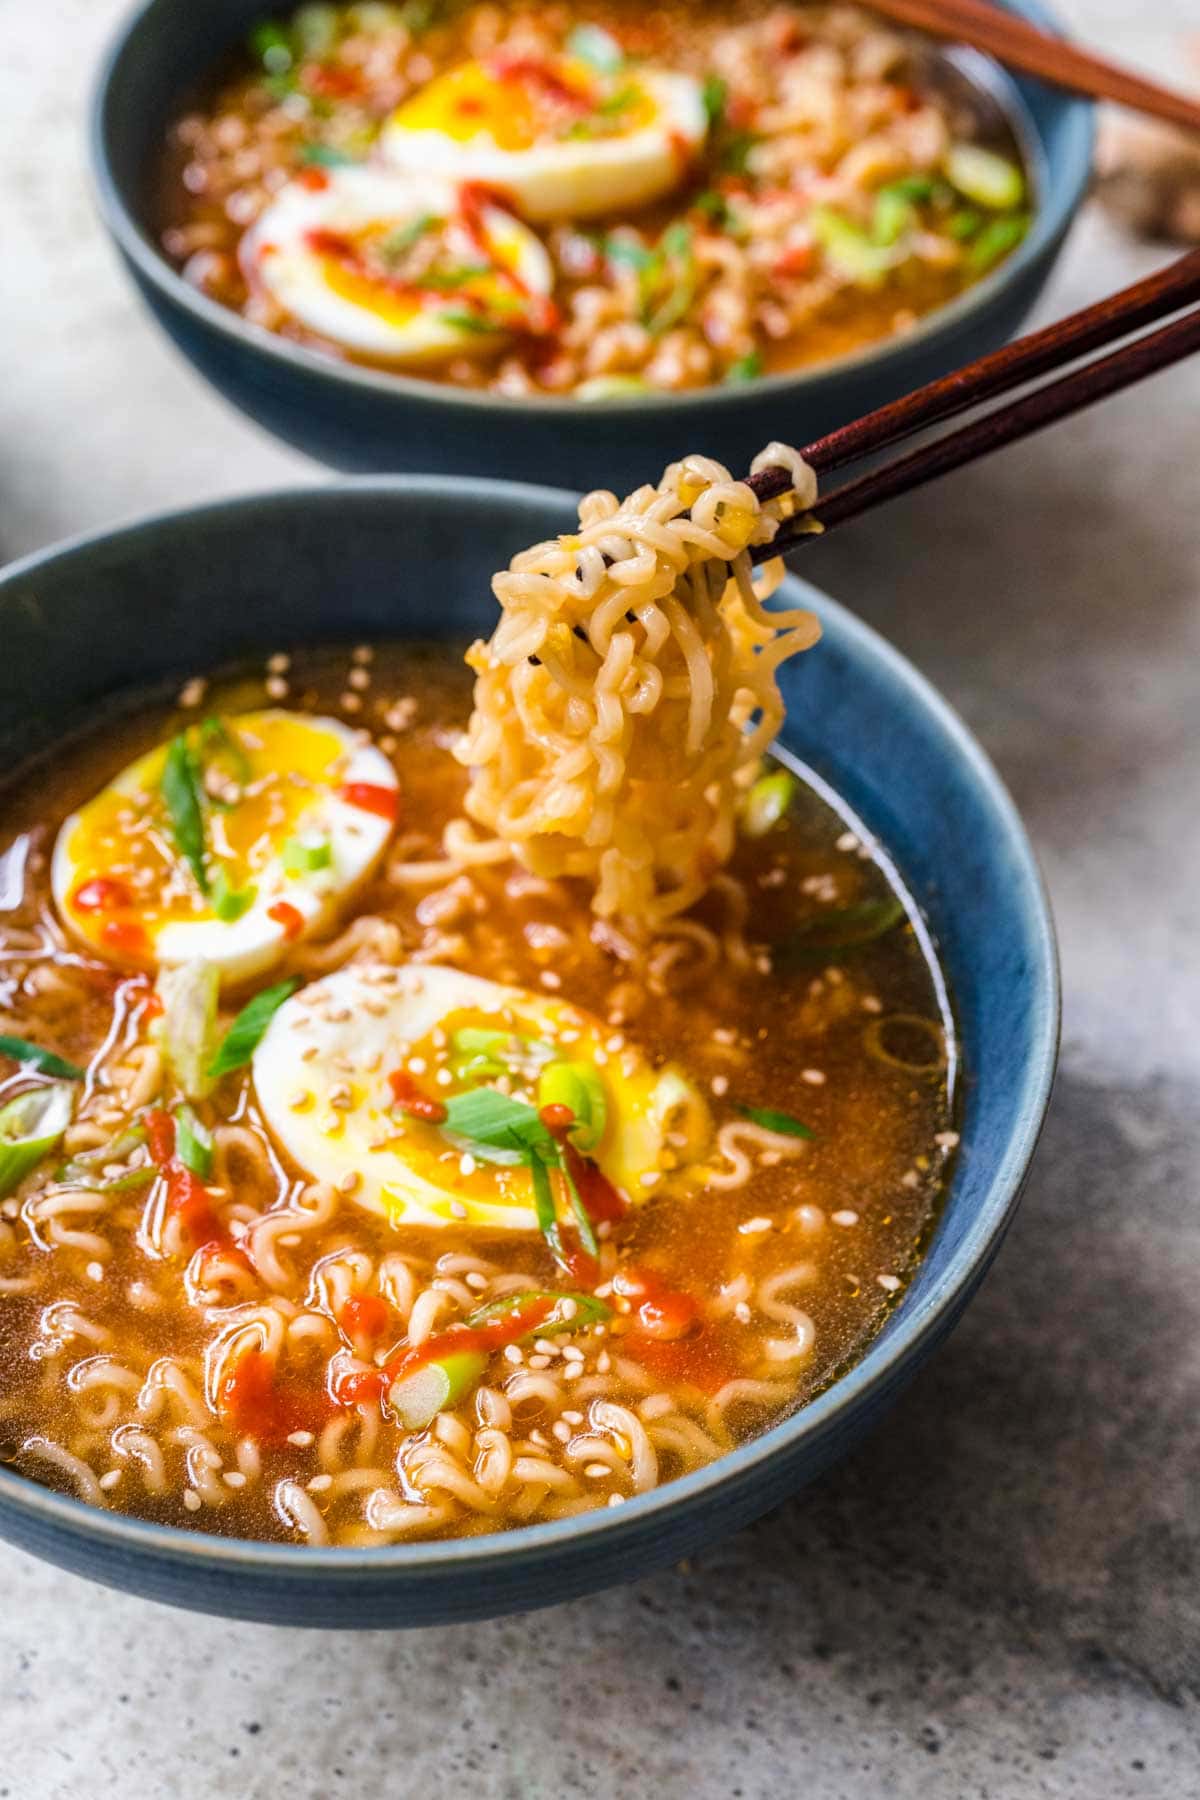 Spicy Ramen finished in bowl with toppings and chopsticks holding noodles over bowl